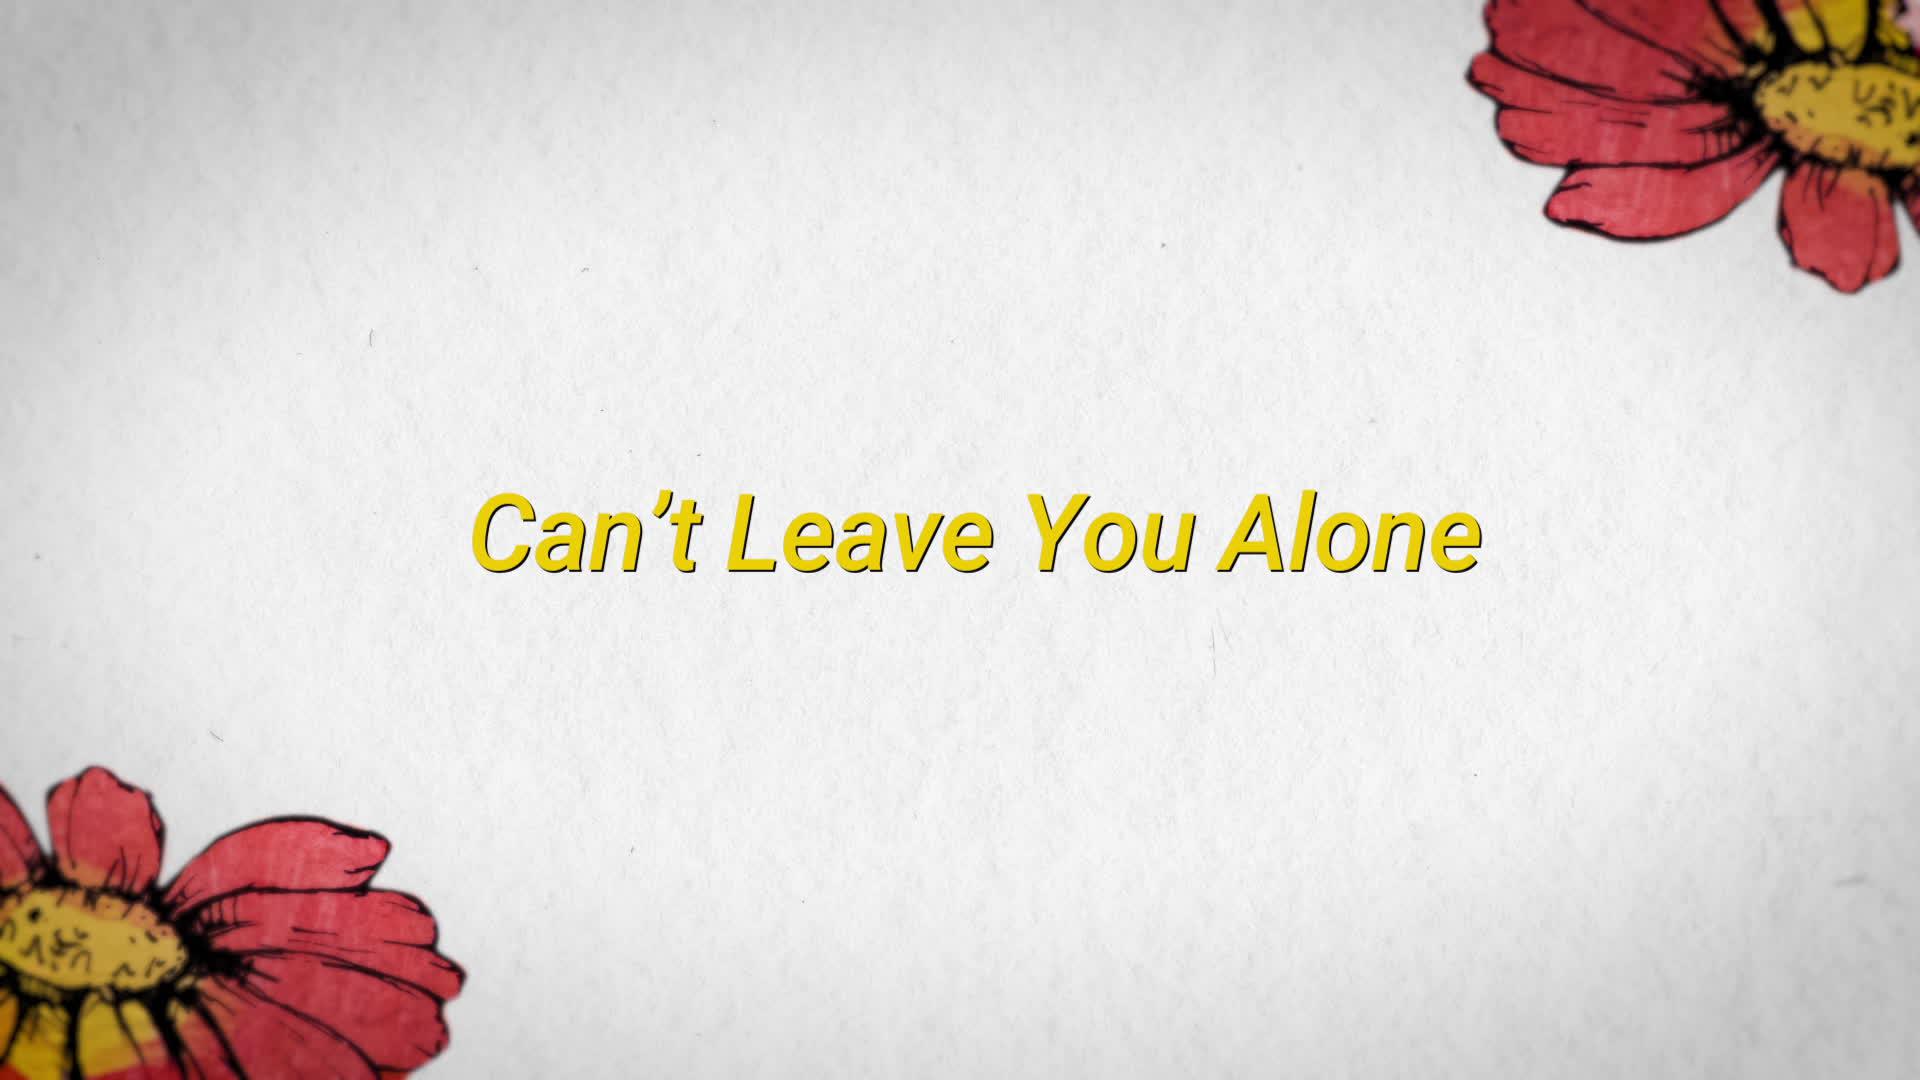 Maroon 5 - Can't Leave You Alone (Lyric Video)